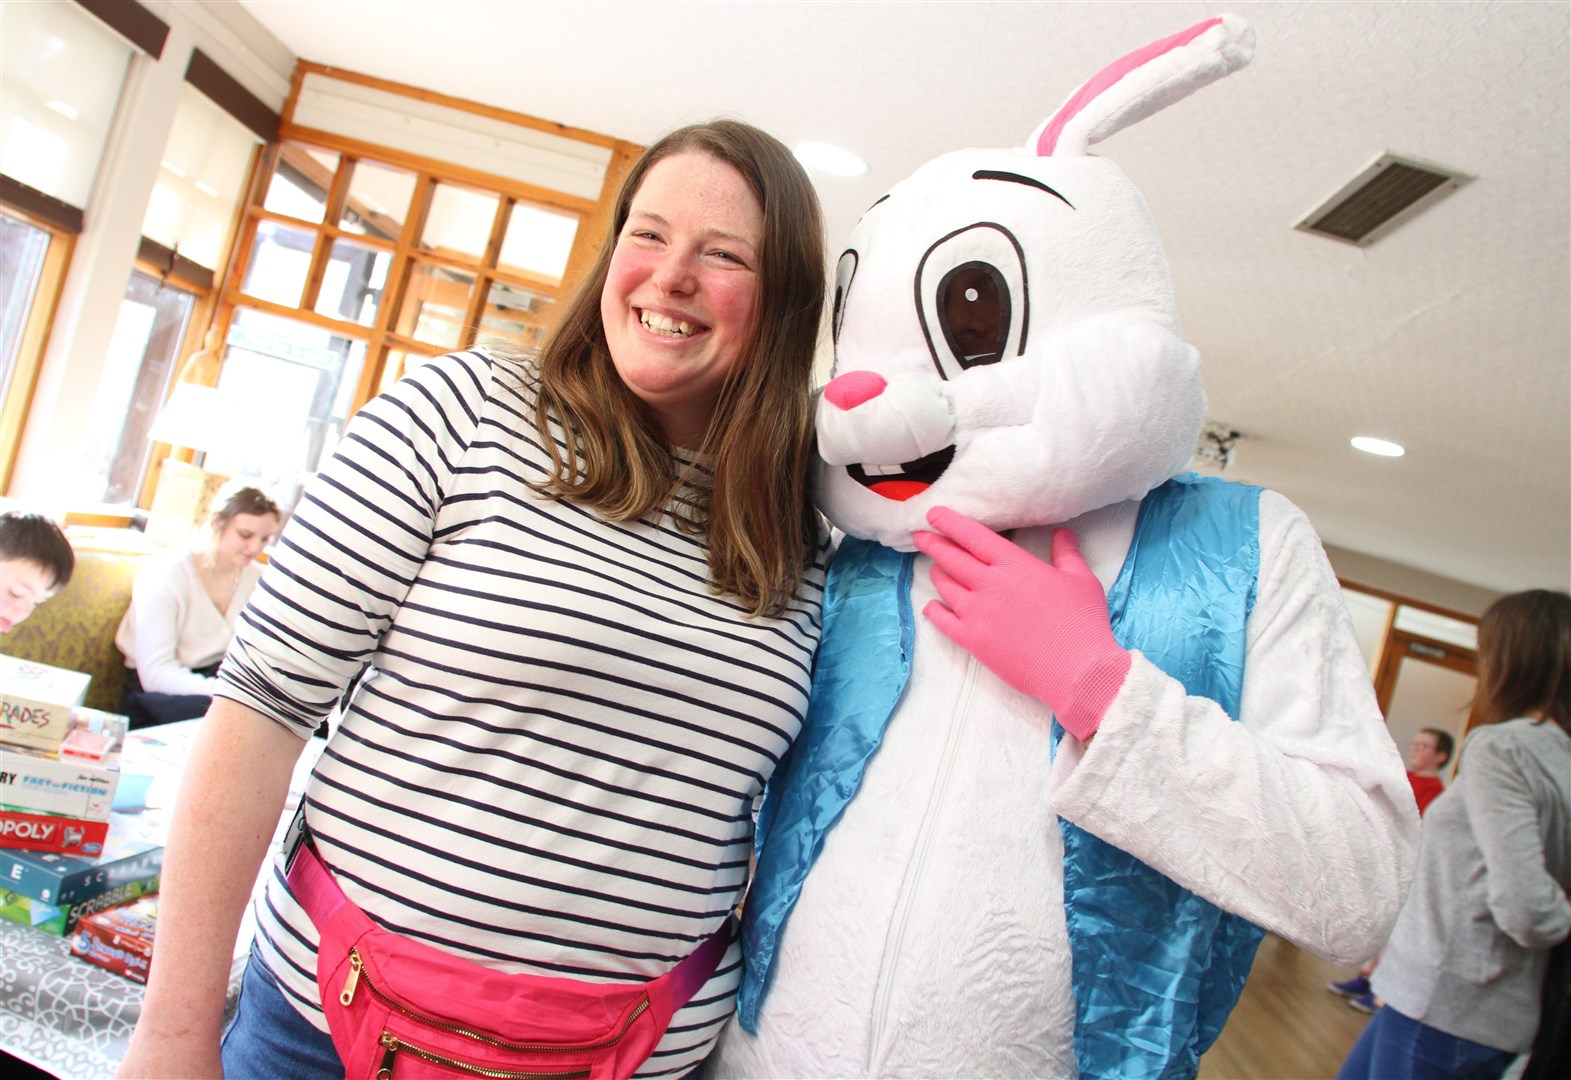 THE BUNNYSIDE PLAY PARK PROJECT: Spokesperson Kathryn Craig with an Easter pal!